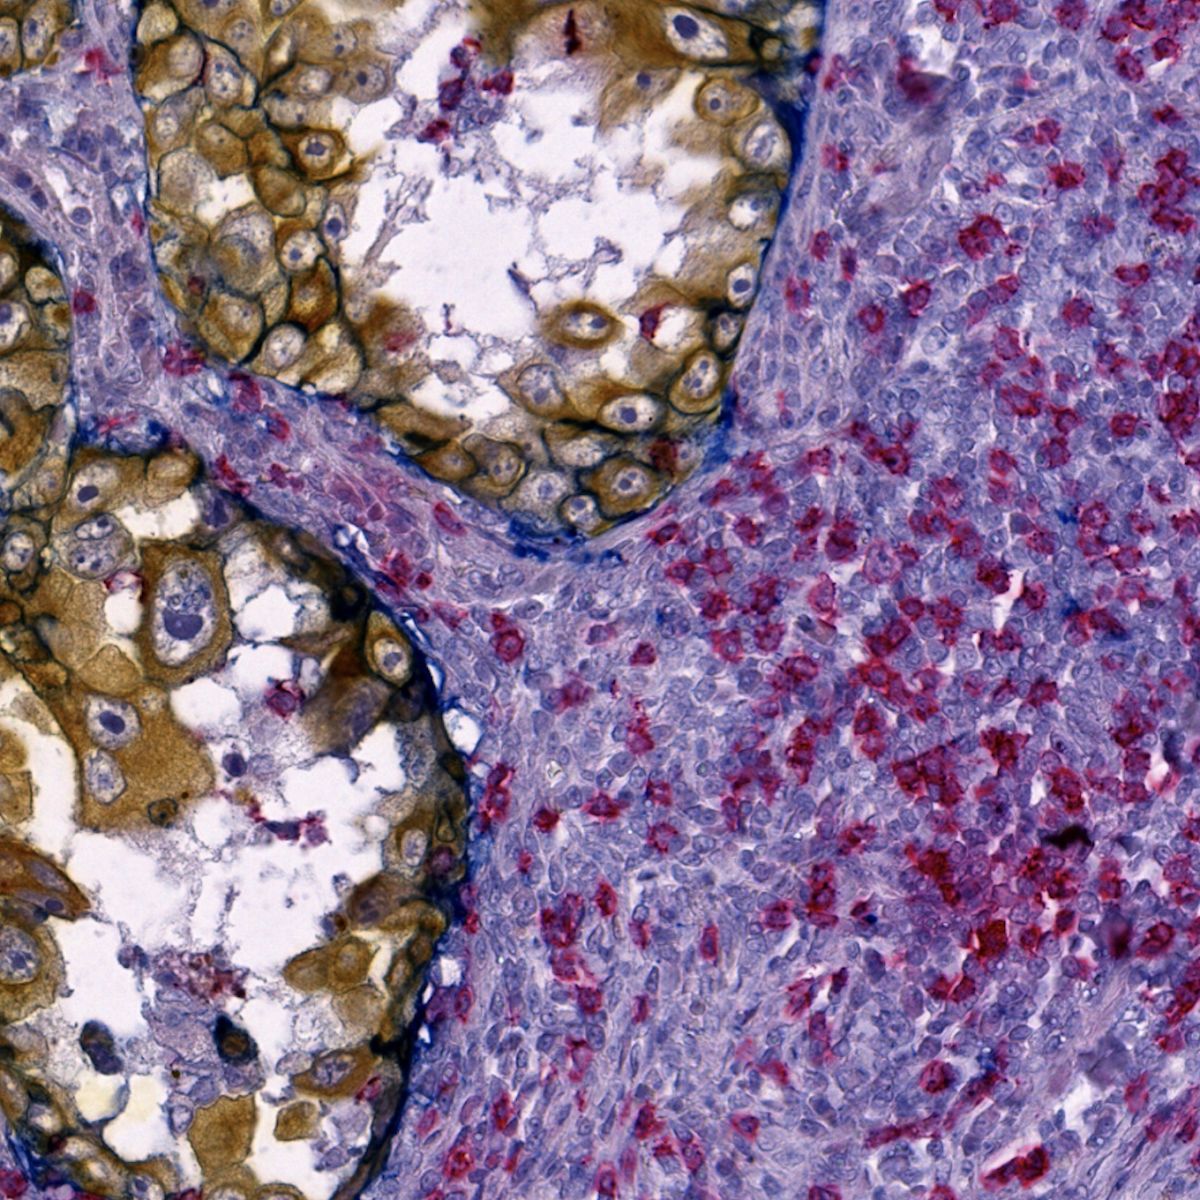 Lung adenocarcinoma stained with anti-CD8, anti-PD-L1 and anti-PanCK antibodies labeled and detected using UTCK-AP1, UTCK-HRP1 & UTCK-HRP2 Kits and Cell Palette Red AP, Blue HRP and Yellow HRP chromogens